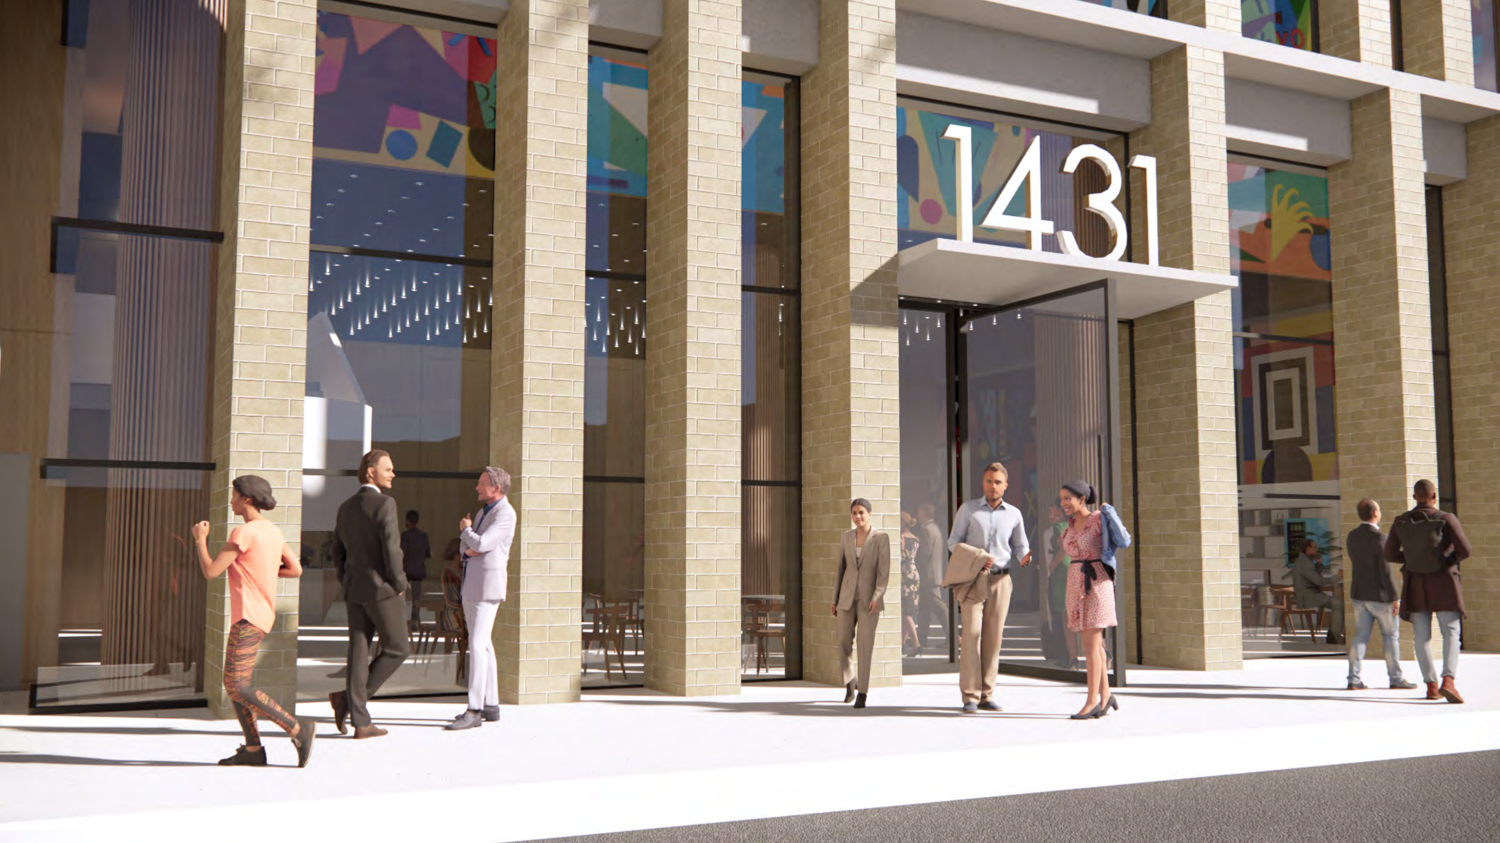 1431 Franklin Street office entrance, rendering by Large Architecture